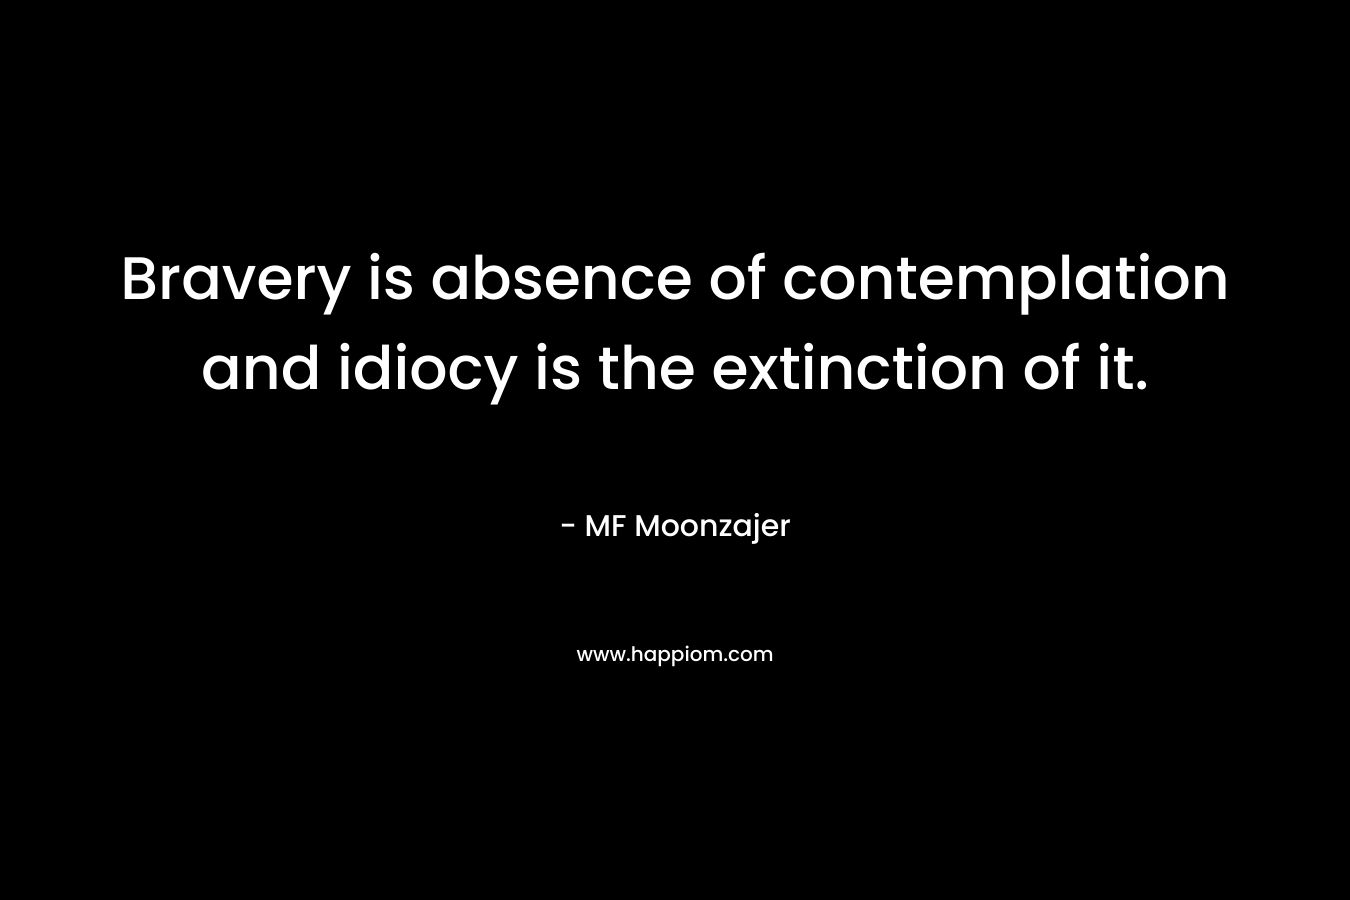 Bravery is absence of contemplation and idiocy is the extinction of it. – MF Moonzajer